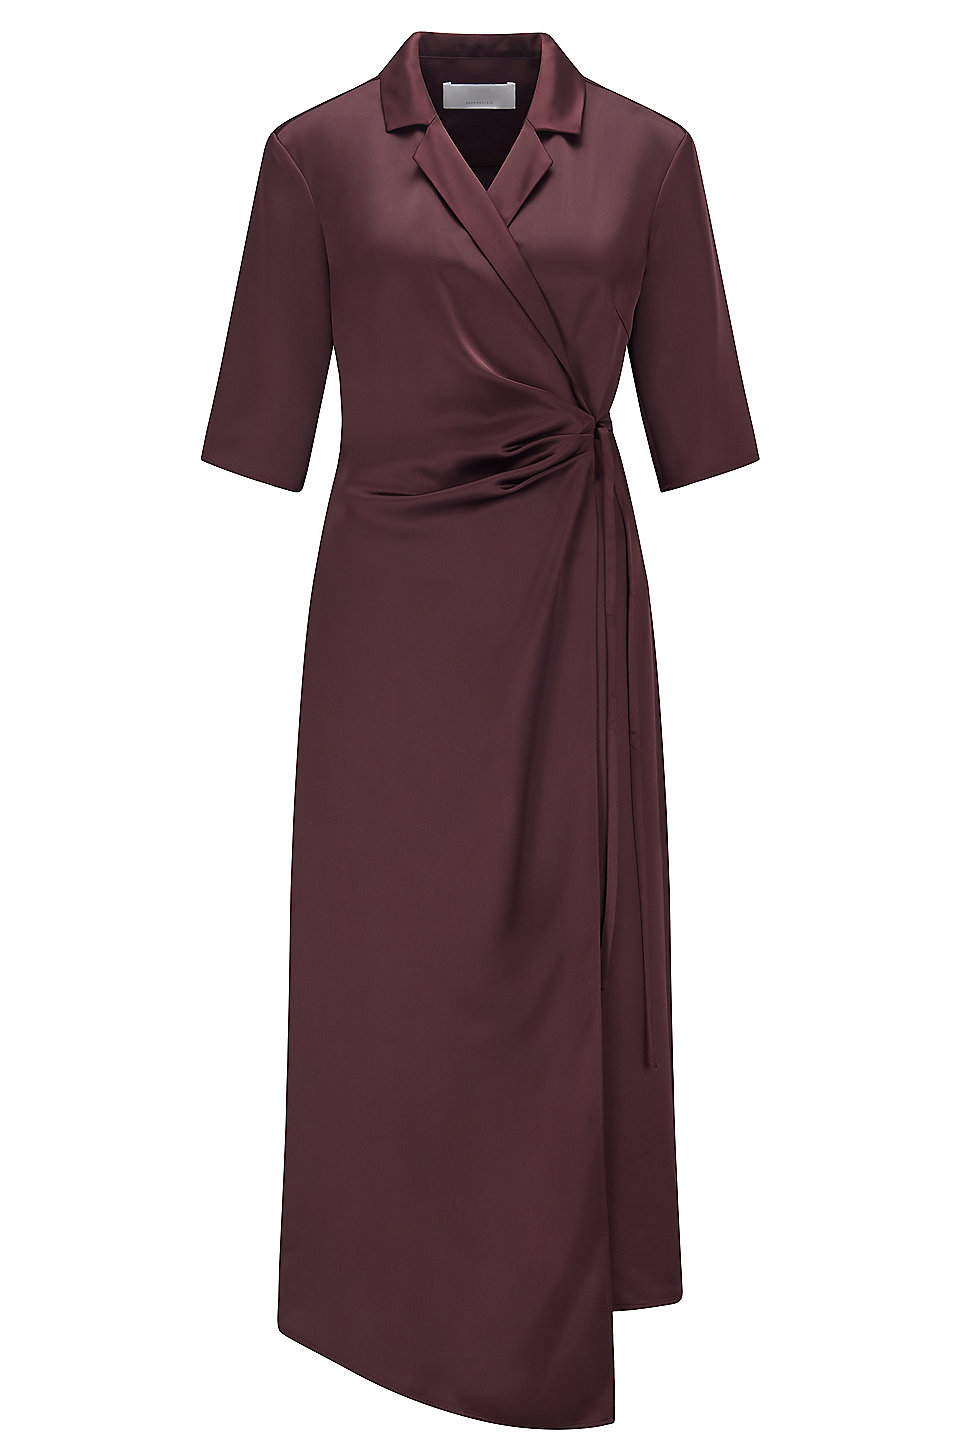 BOSS - Wrap dress in satin with tie-up belt